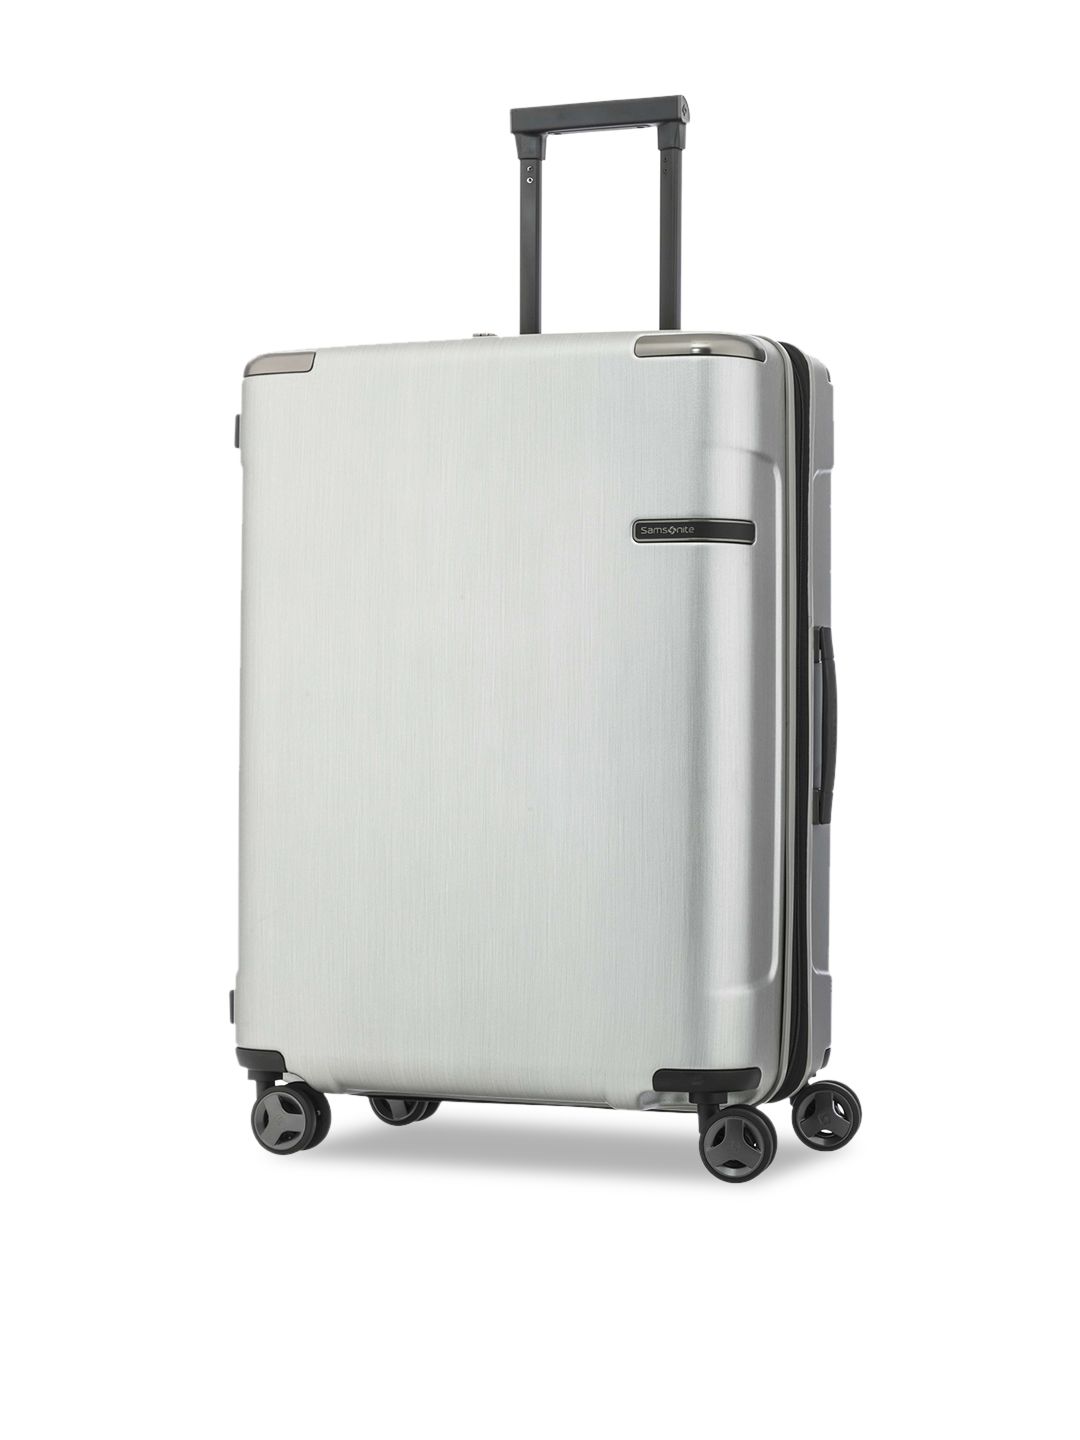 Samsonite Silver Solid Hard-Sided Cabin Trolley Suitcase Price in India